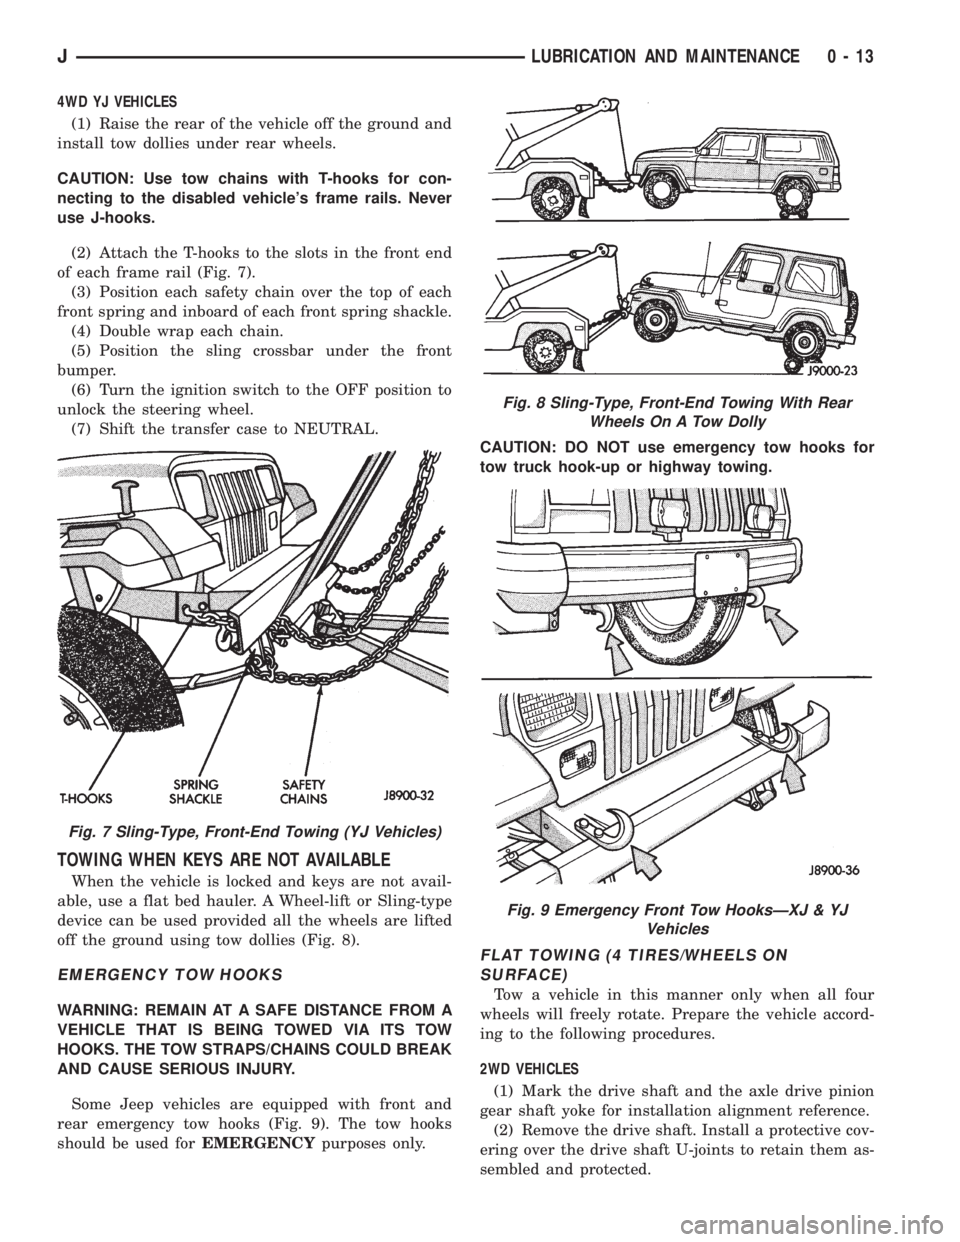 JEEP XJ 1995  Service And Owners Guide 4WD YJ VEHICLES
(1) Raise the rear of the vehicle off the ground and
install tow dollies under rear wheels.
CAUTION: Use tow chains with T-hooks for con-
necting to the disabled vehicles frame rails.